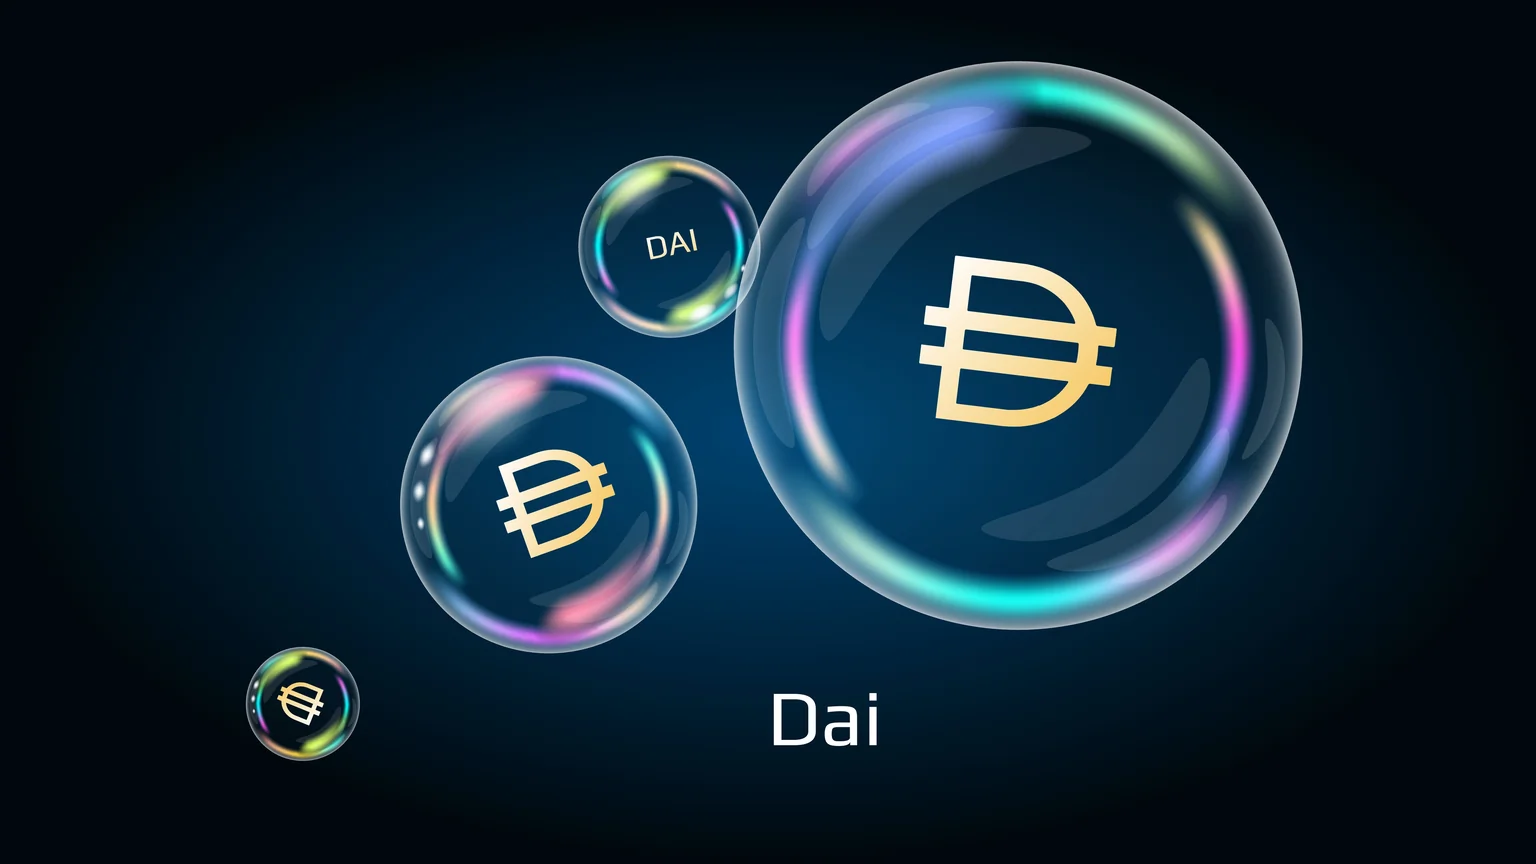 DAI is a stablecoin